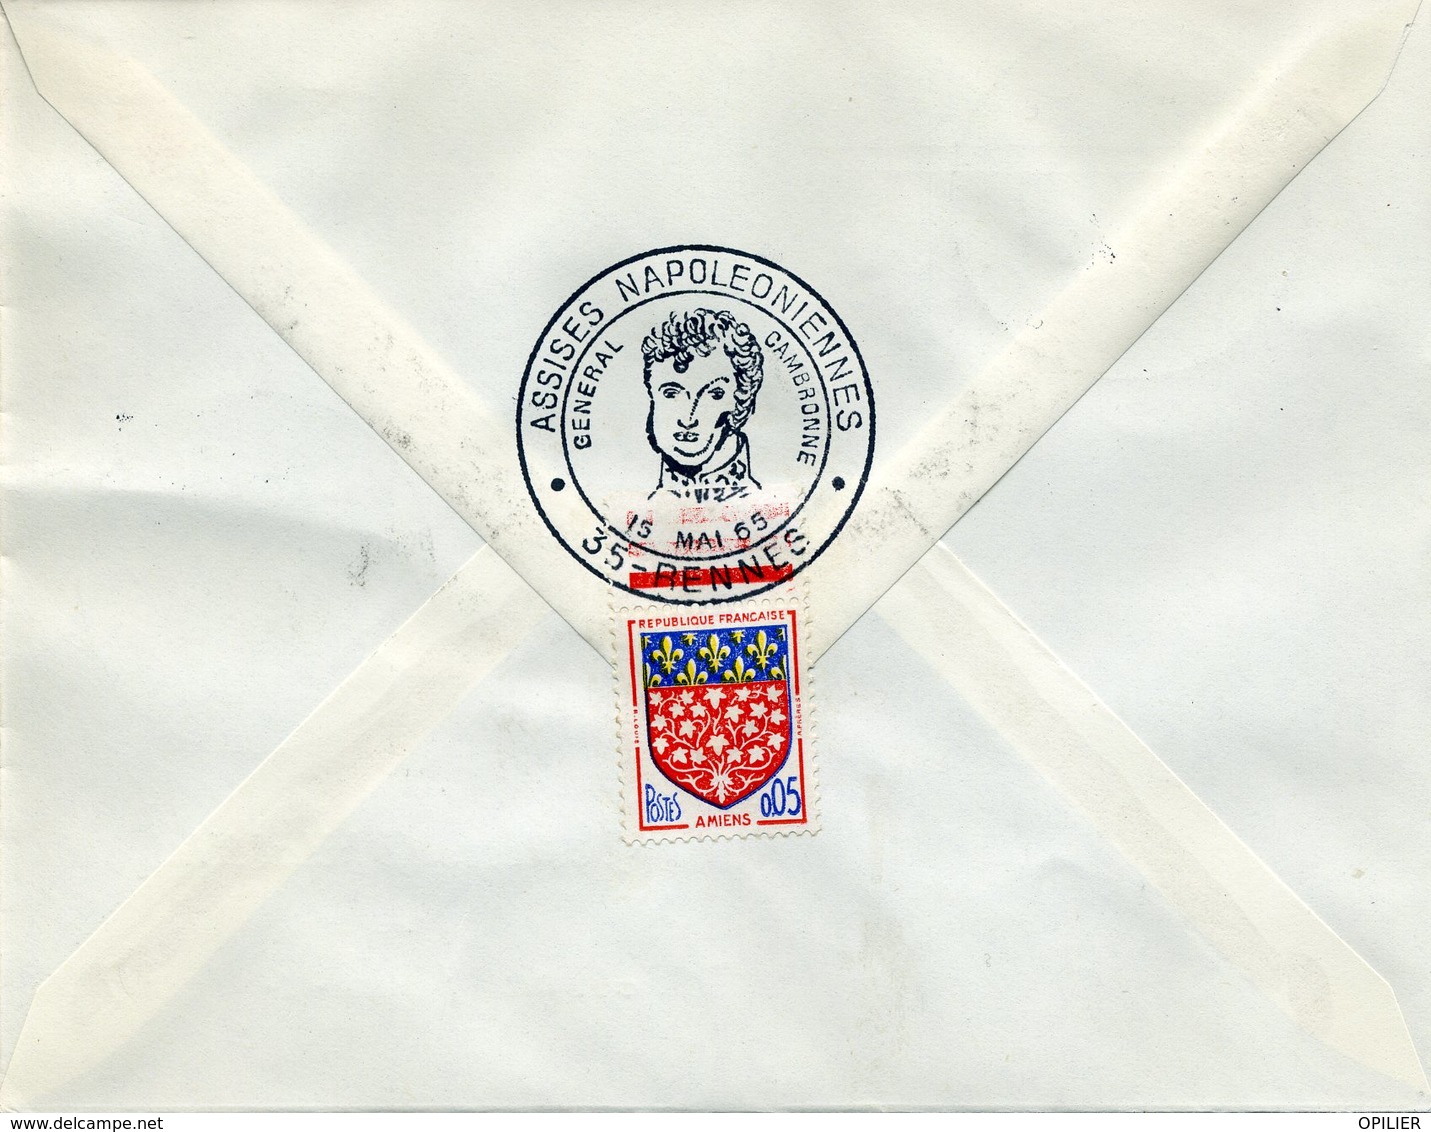 RENNES 15 Mai 1965 ASSISES NAPOLEONIENNES GENERAL CAMBRONNE Napoléon Empire - Manual Postmarks